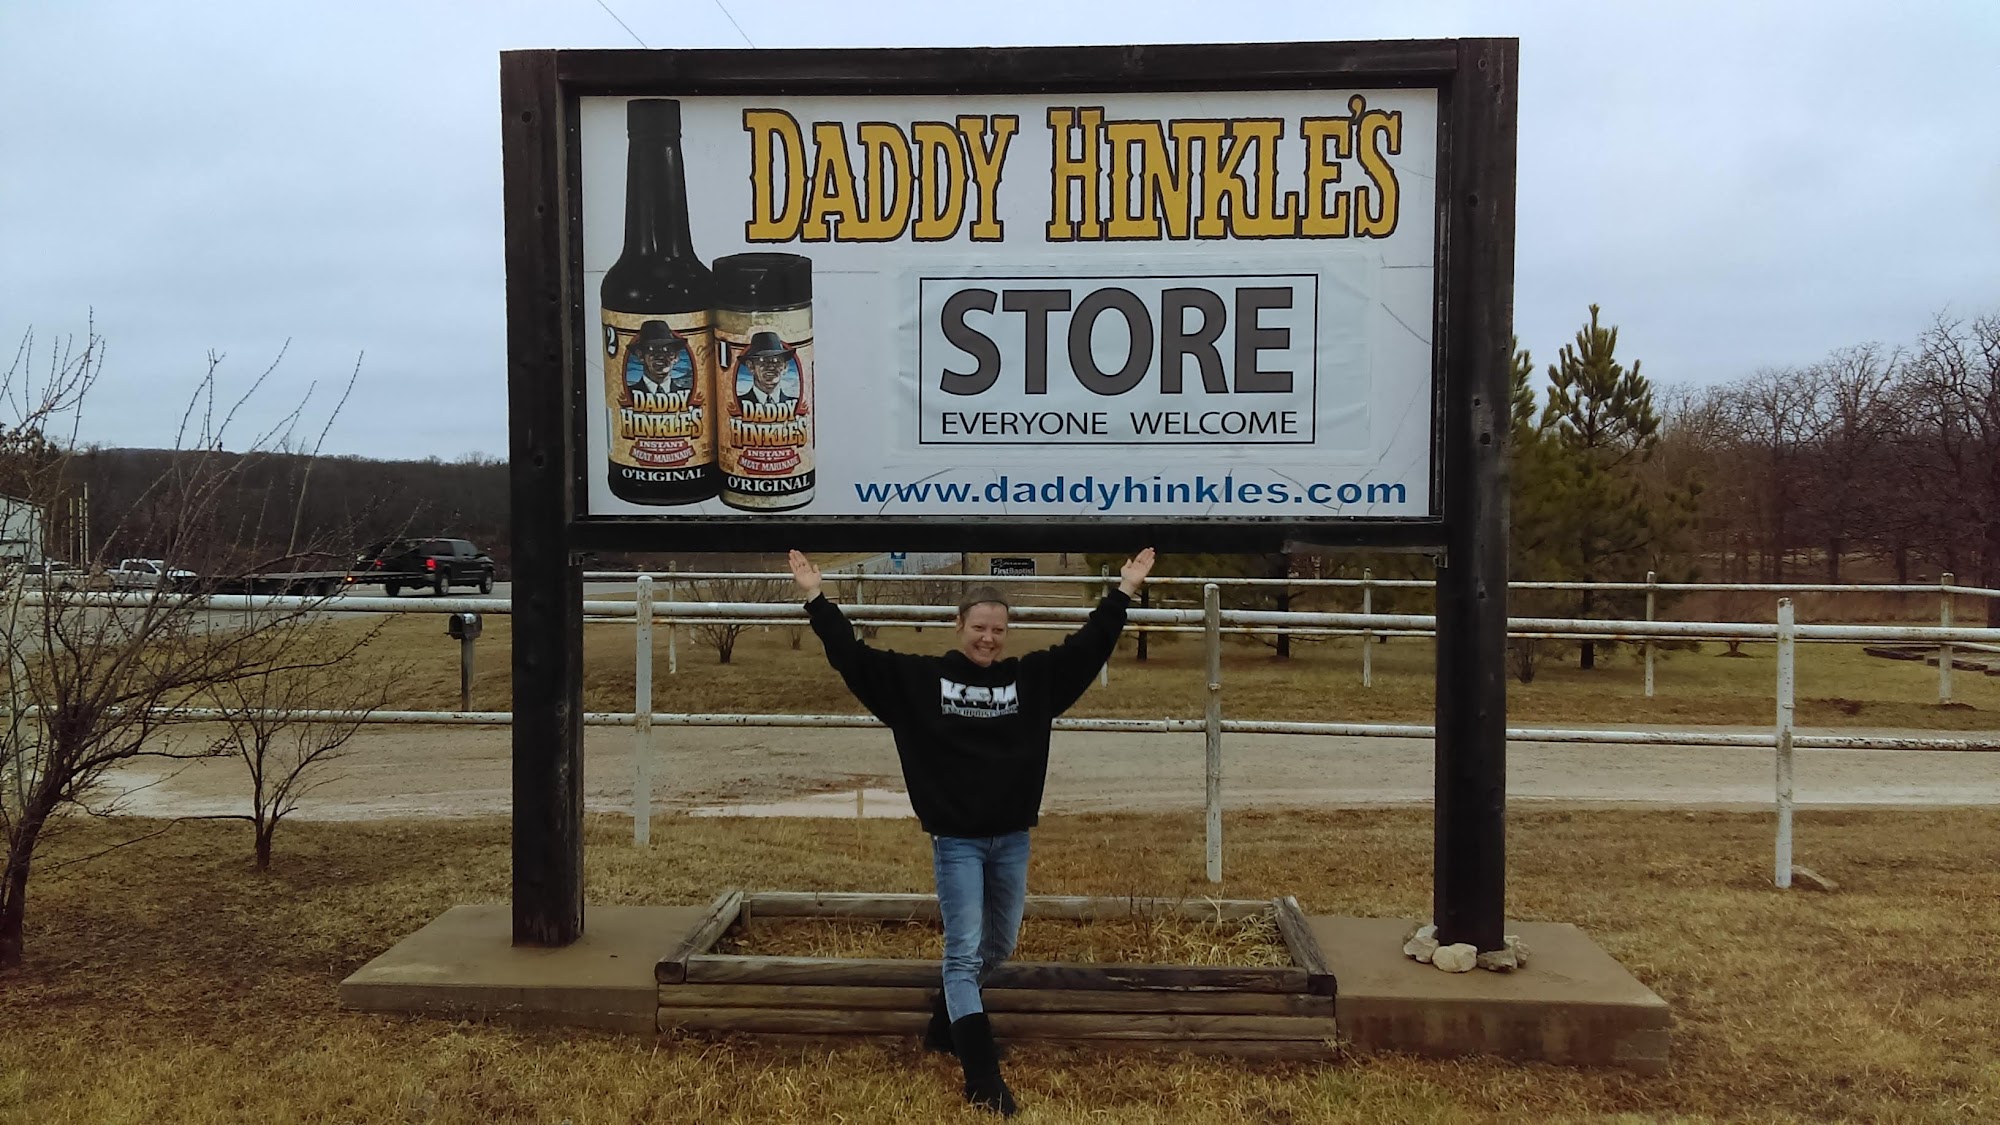 Daddy Hinkle's Inc